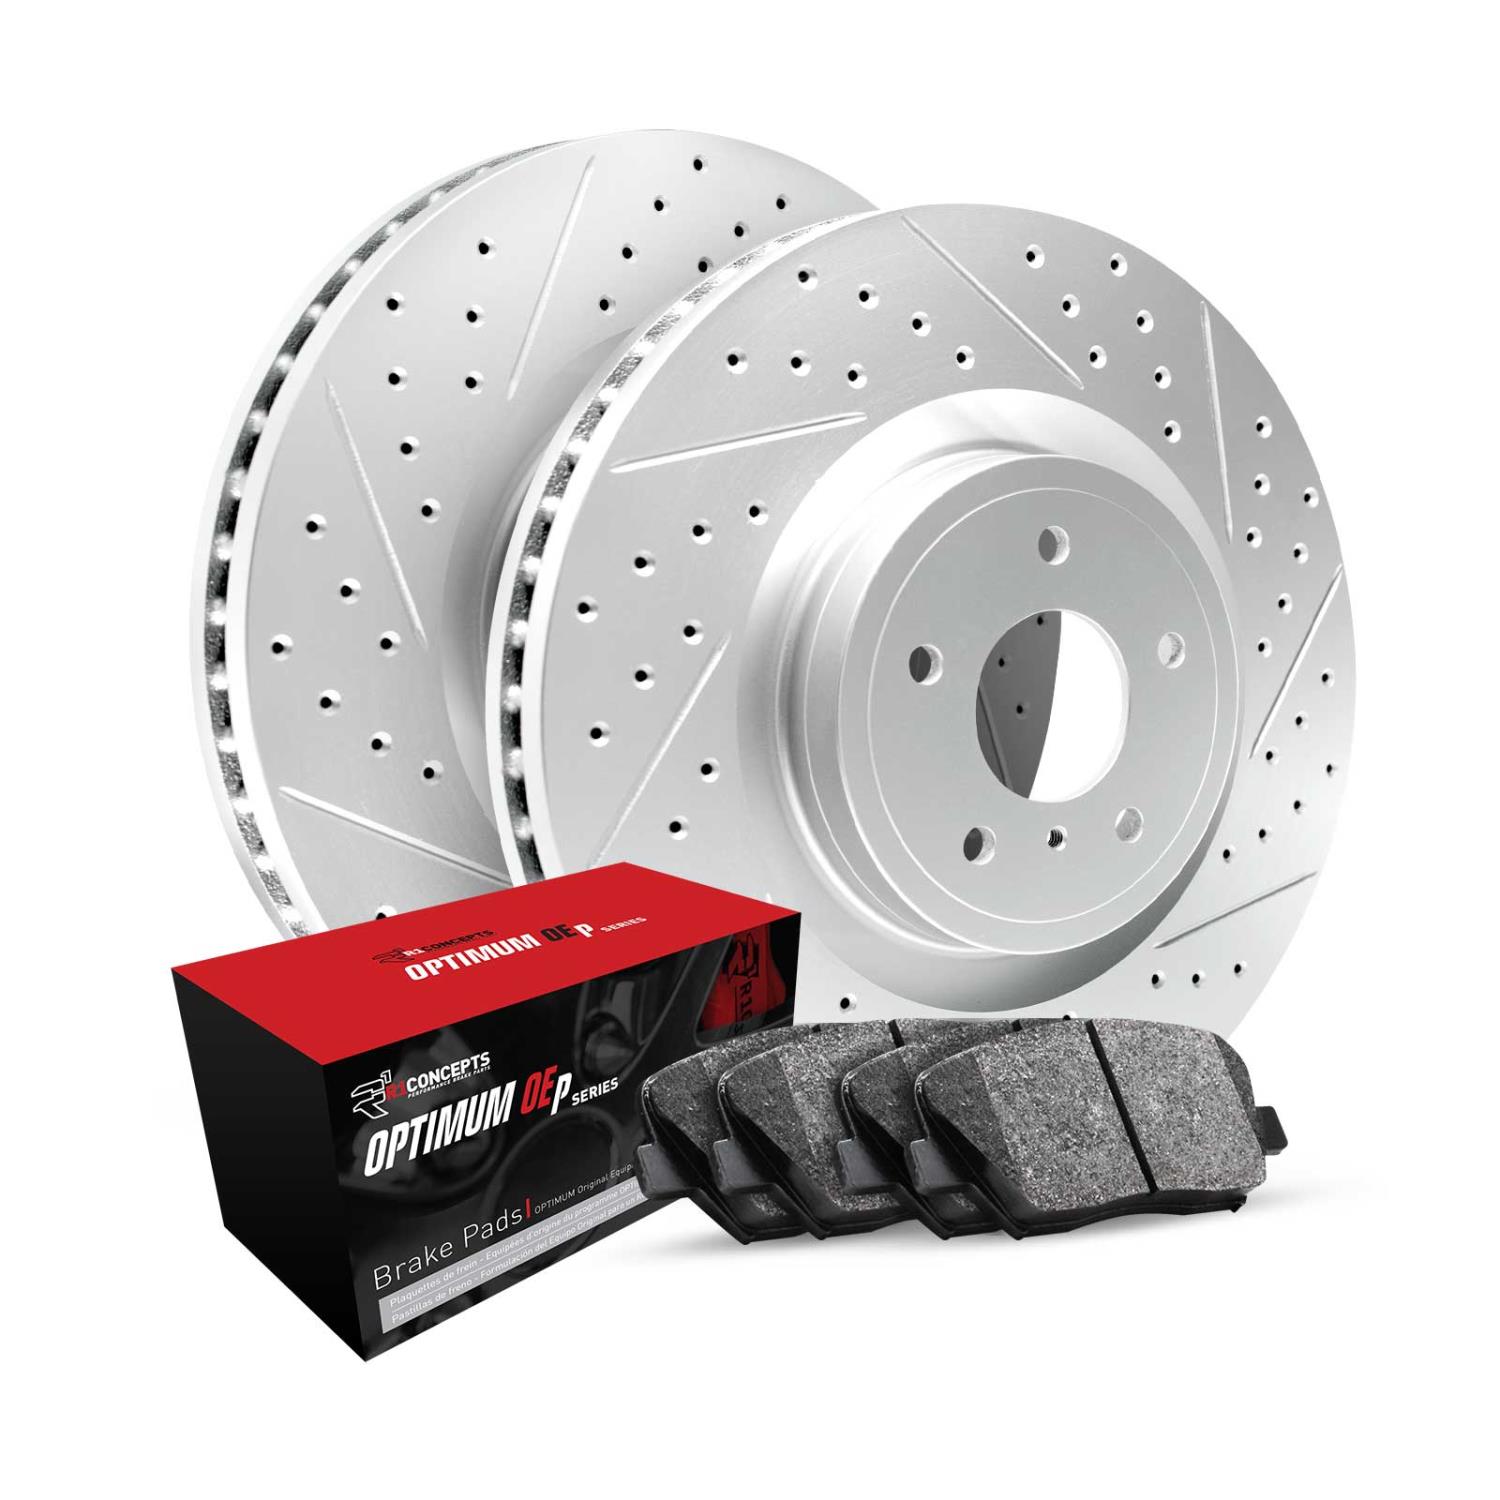 GEO-Carbon Drilled & Slotted Brake Rotor Set w/Optimum OE Pads, 2006-2013 Ford/Lincoln/Mercury/Mazda, Position: Front & Rear